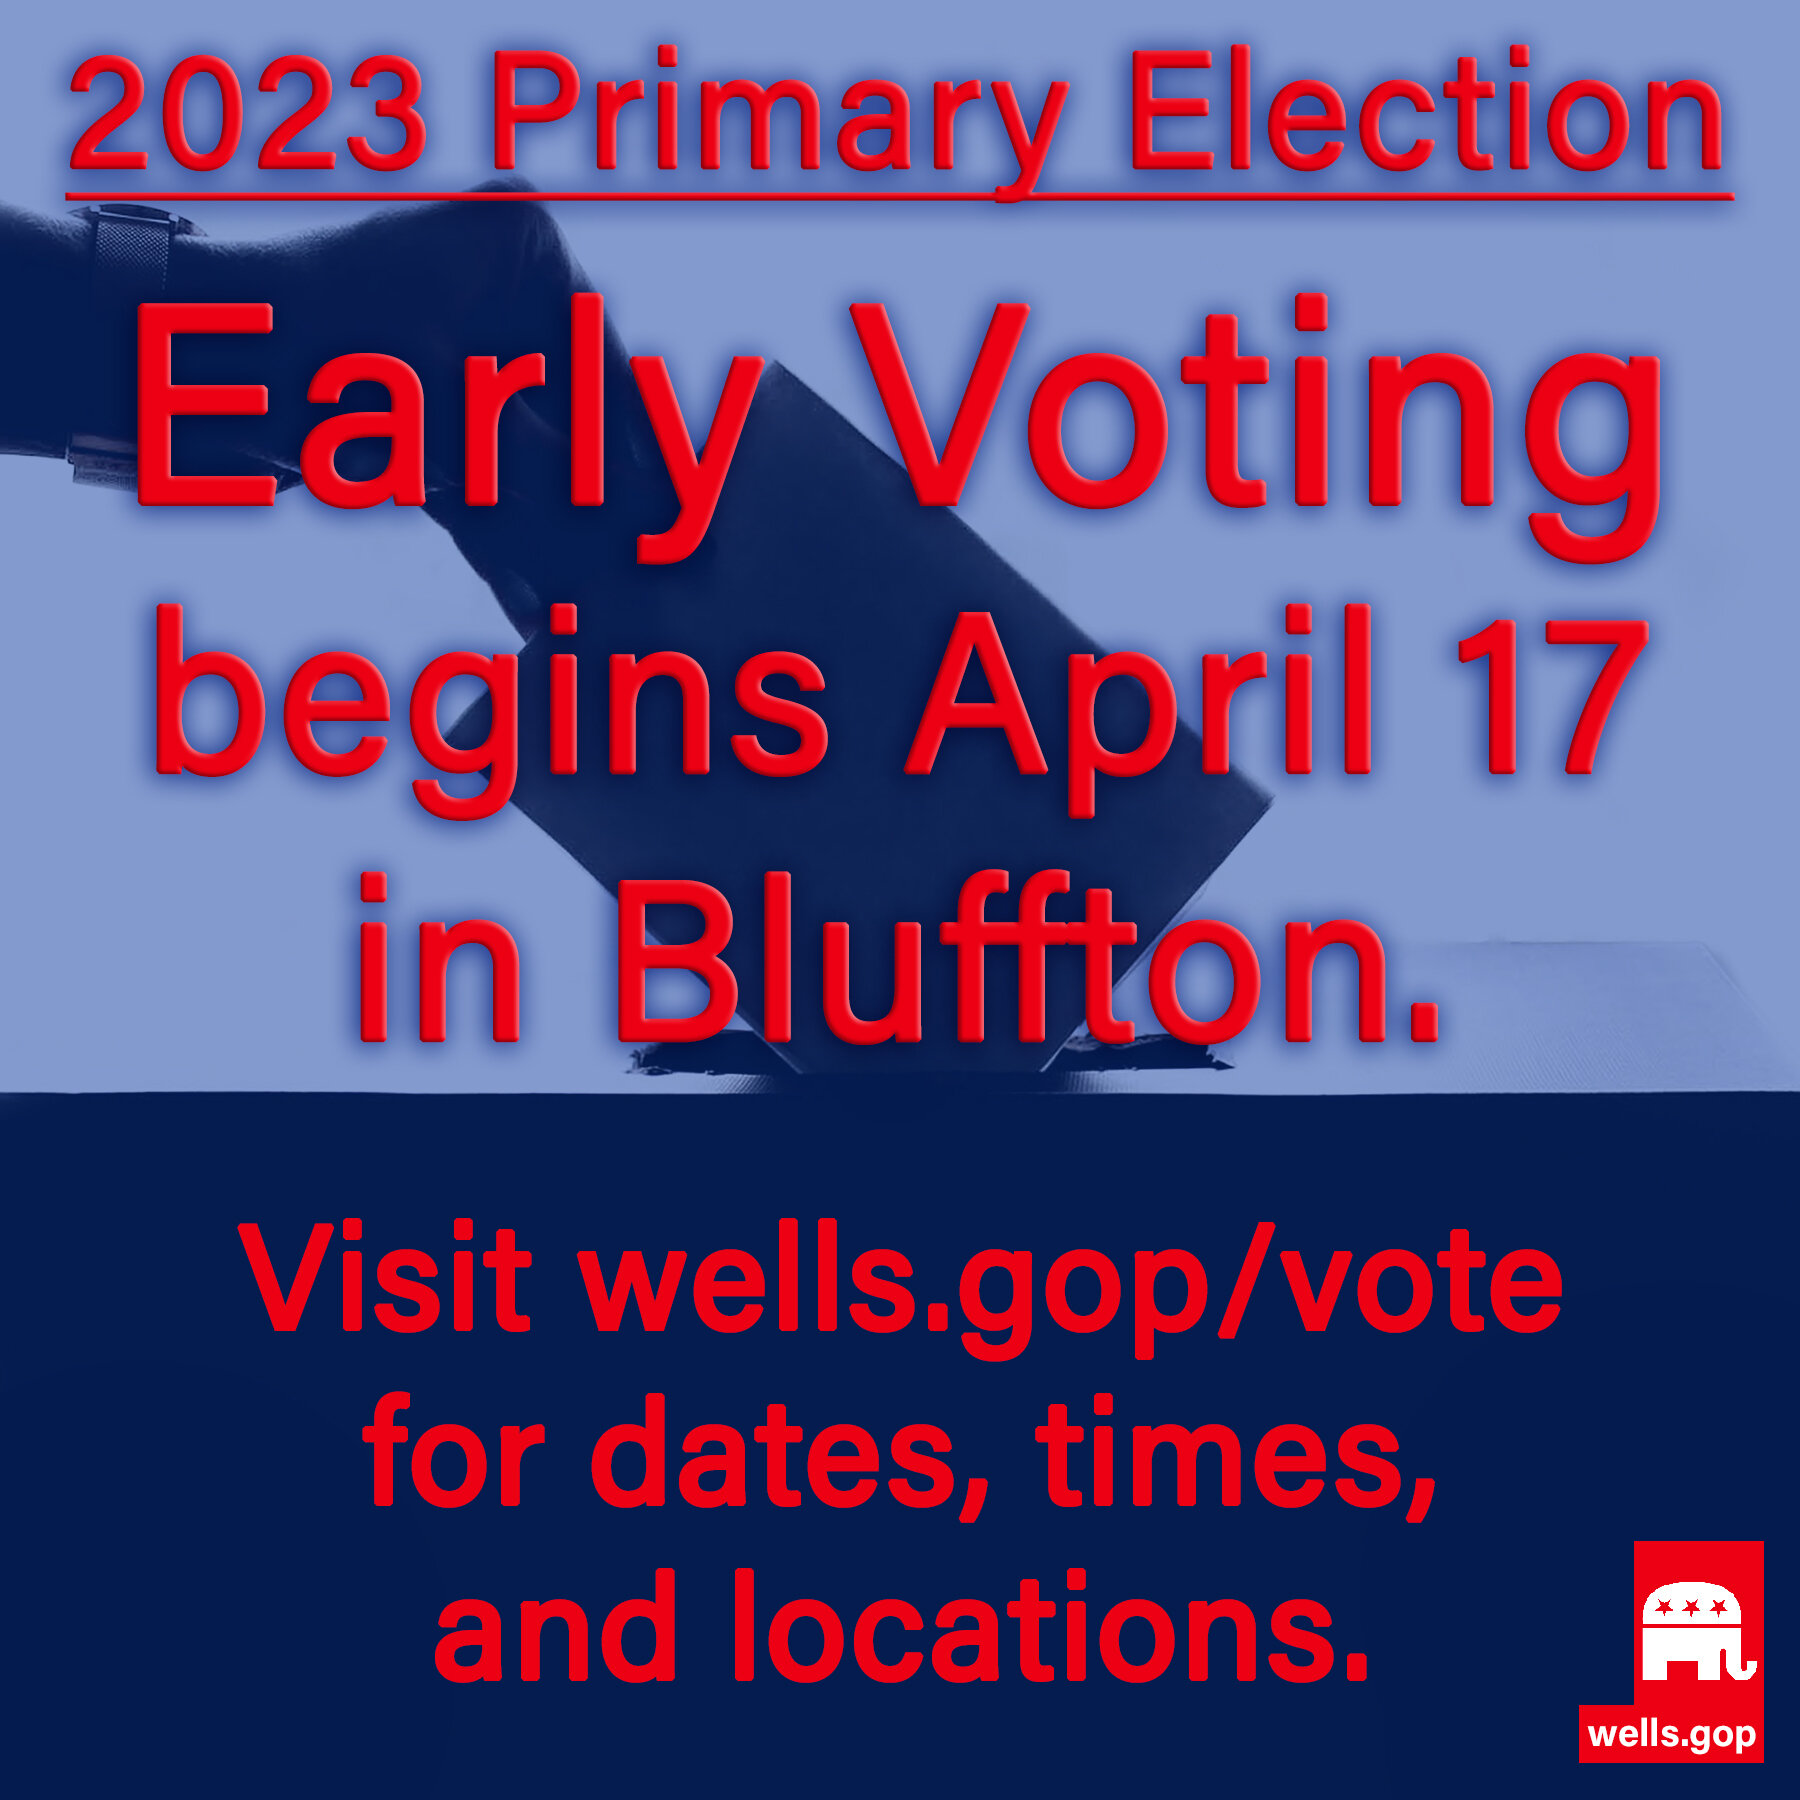 Early voting begins today in Bluffton! Remember that you must be a registered voter within city limits to vote in this election. More information here: https://wells.gop/vote